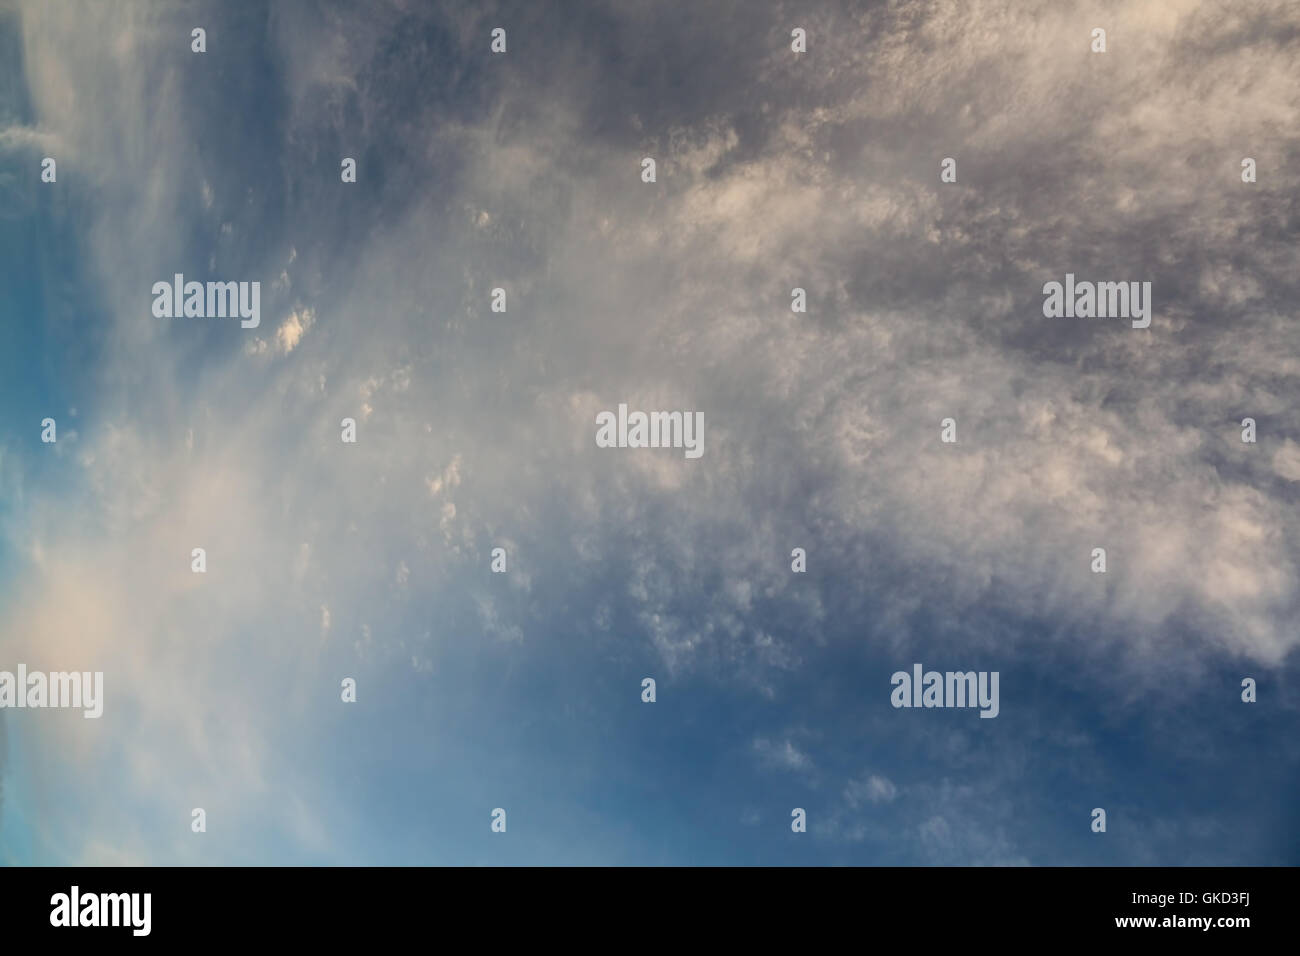 Partly cloudy background pattern Stock Photo